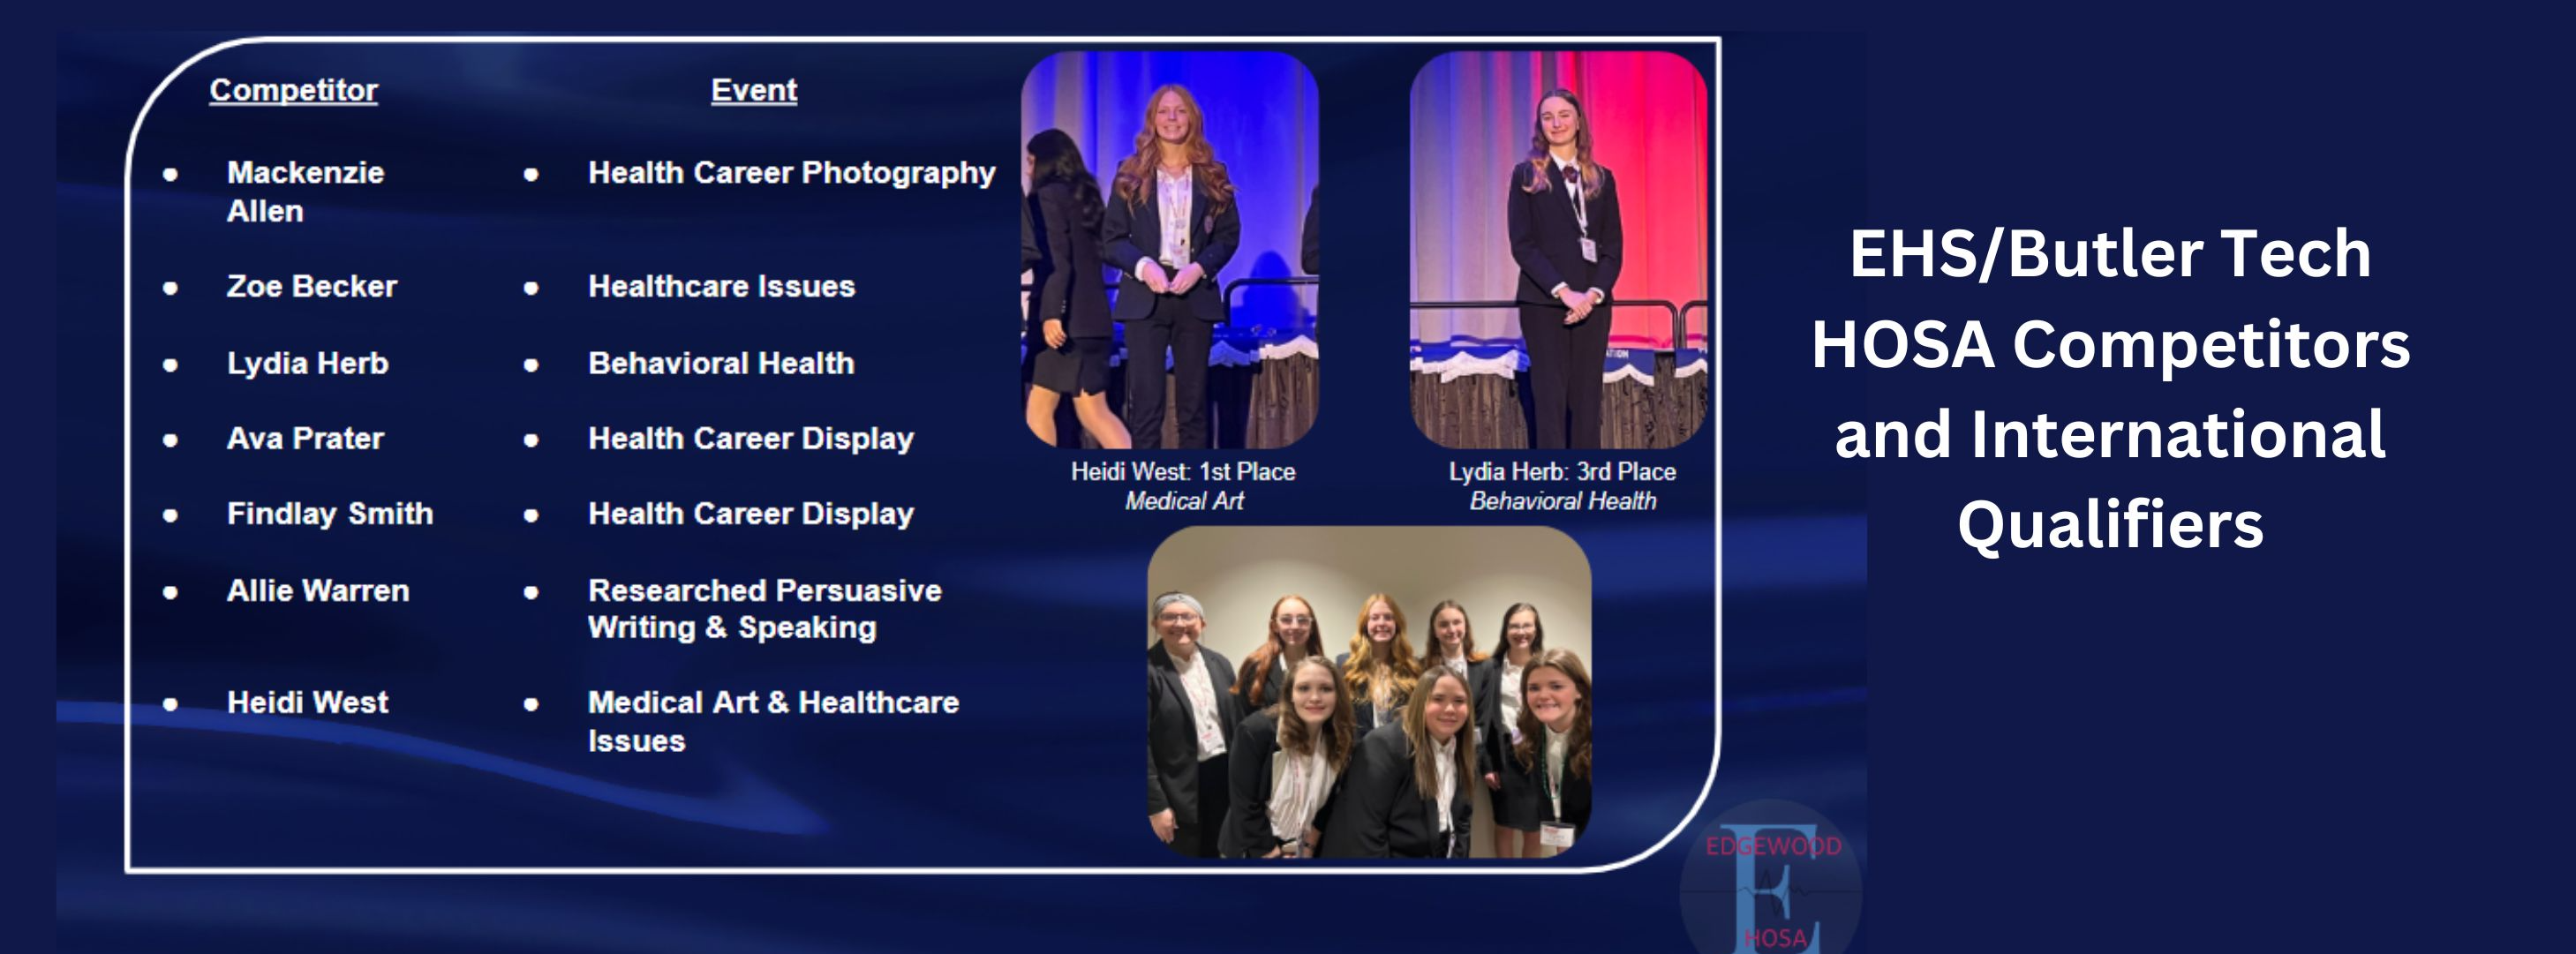 picture of HOSA winner and competitors from EHS